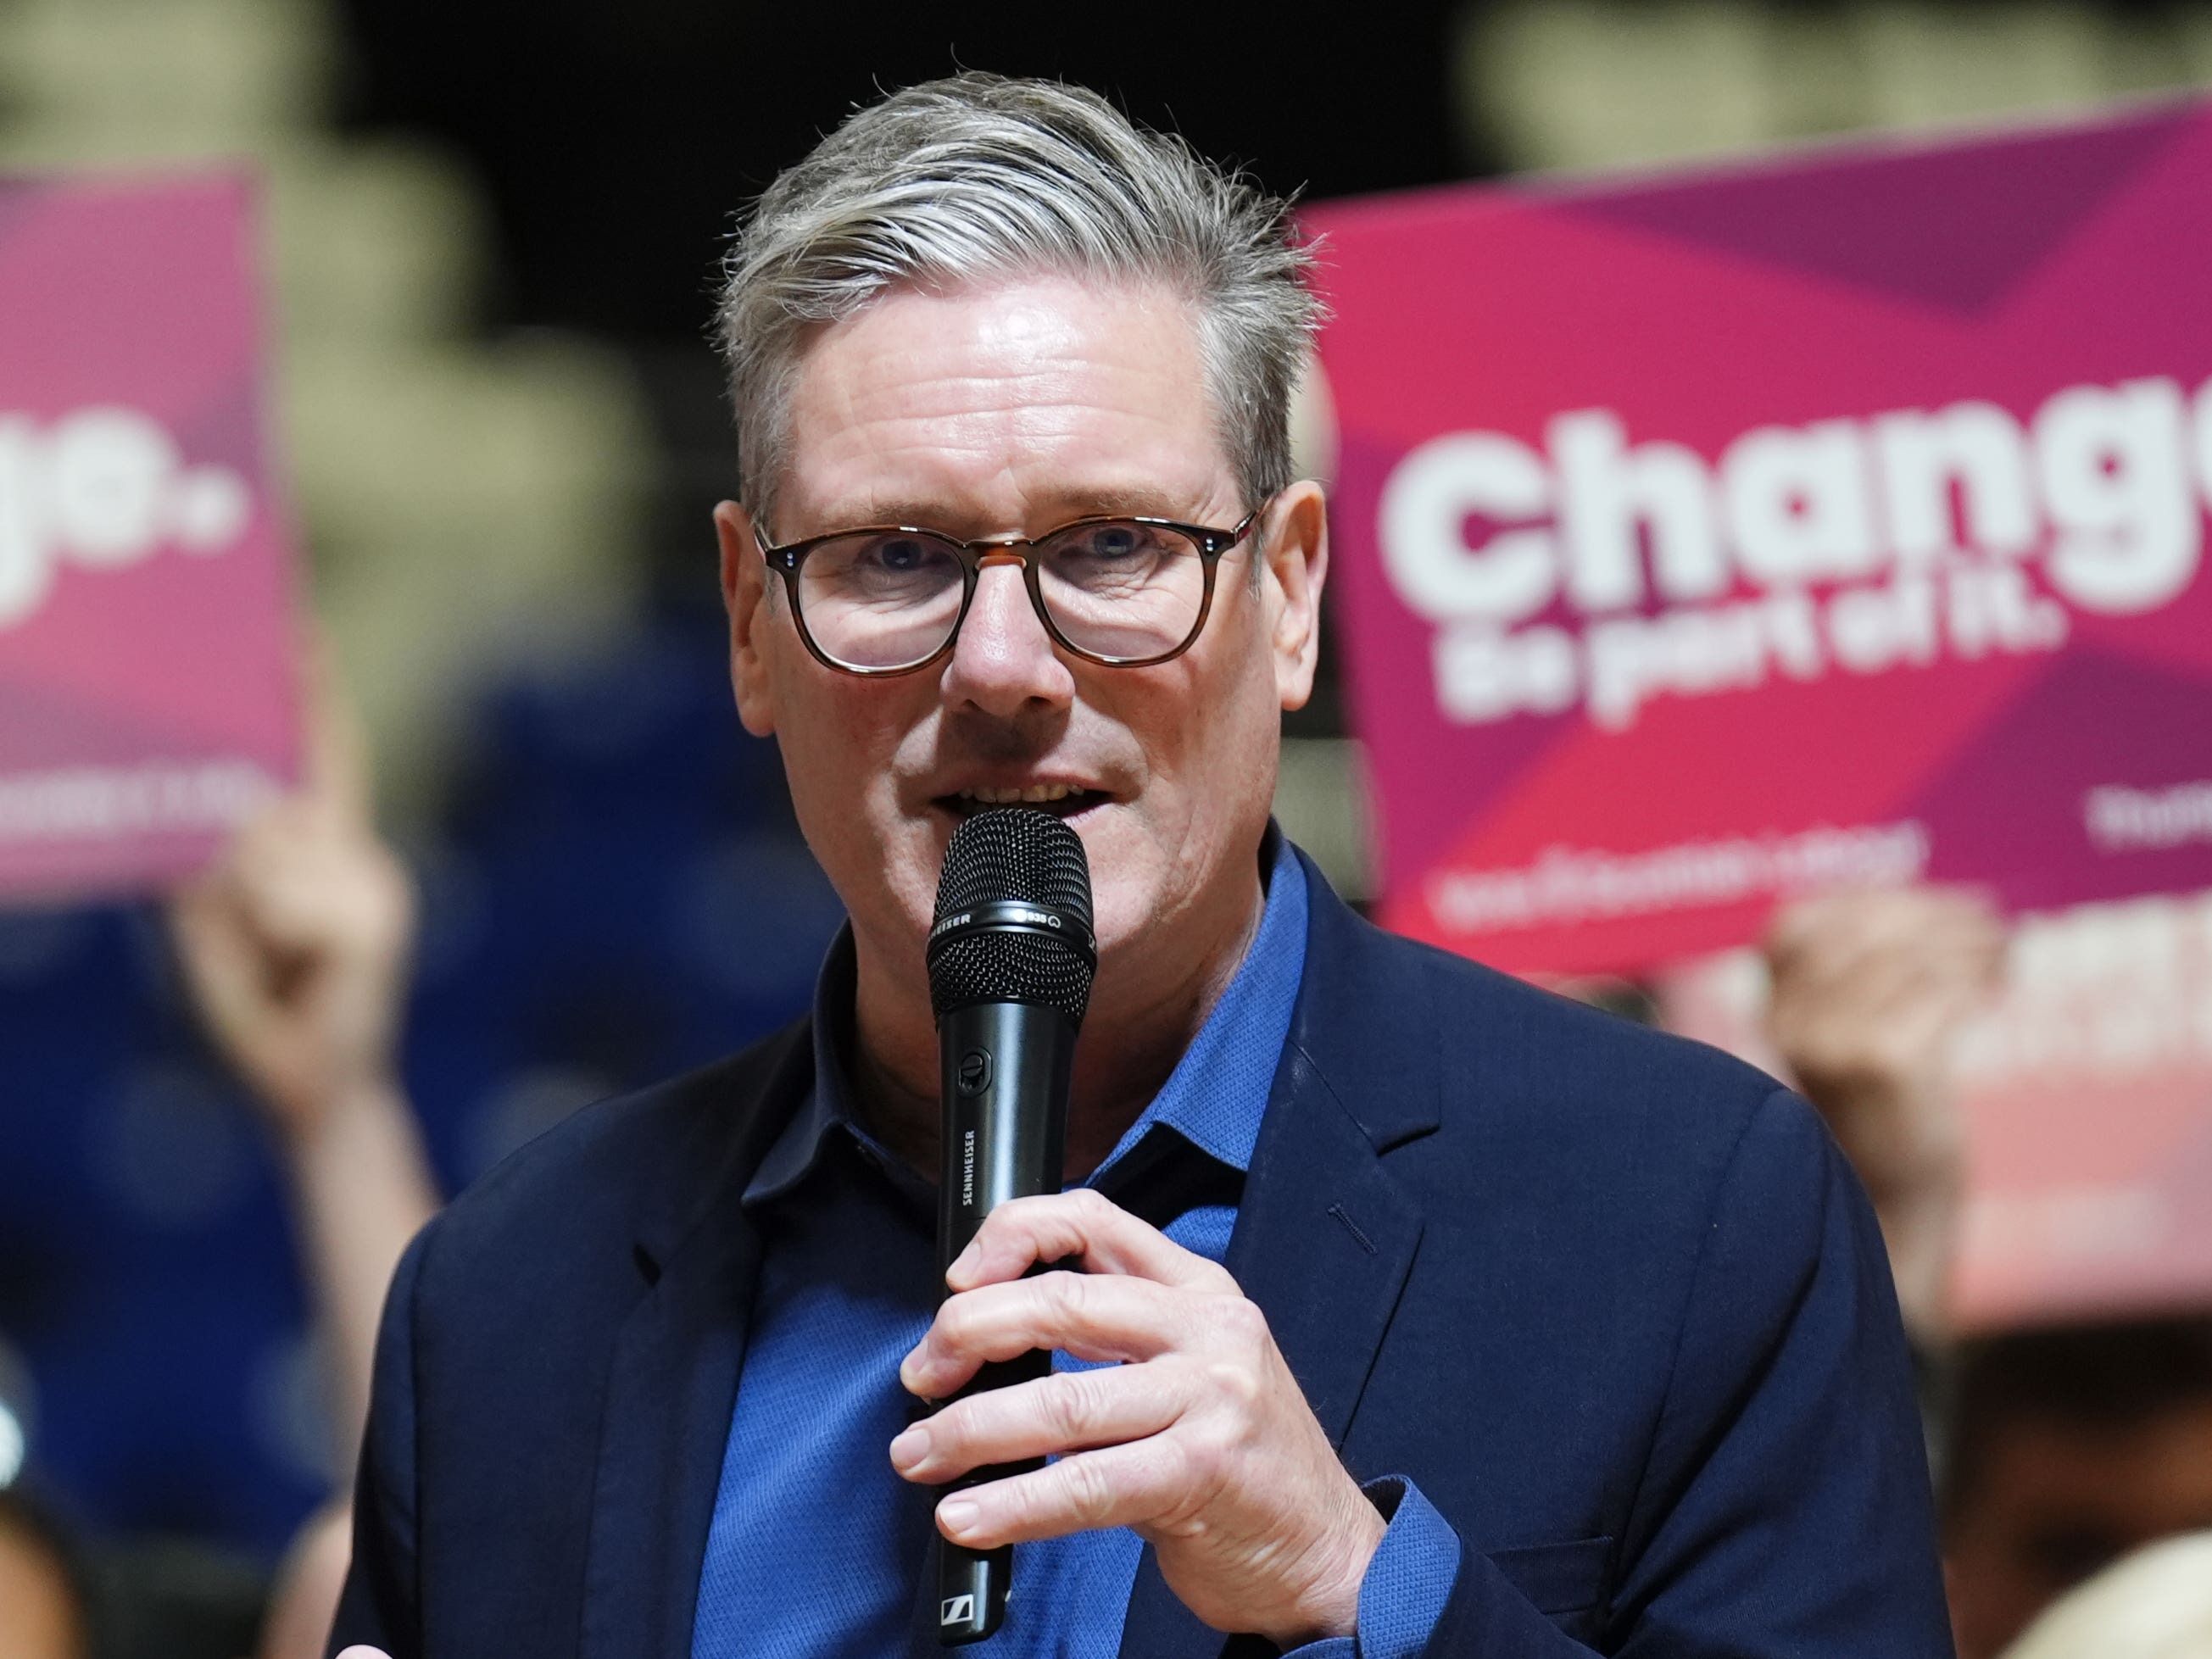 Starmer says he owes it to his children to keep them out of the limelight